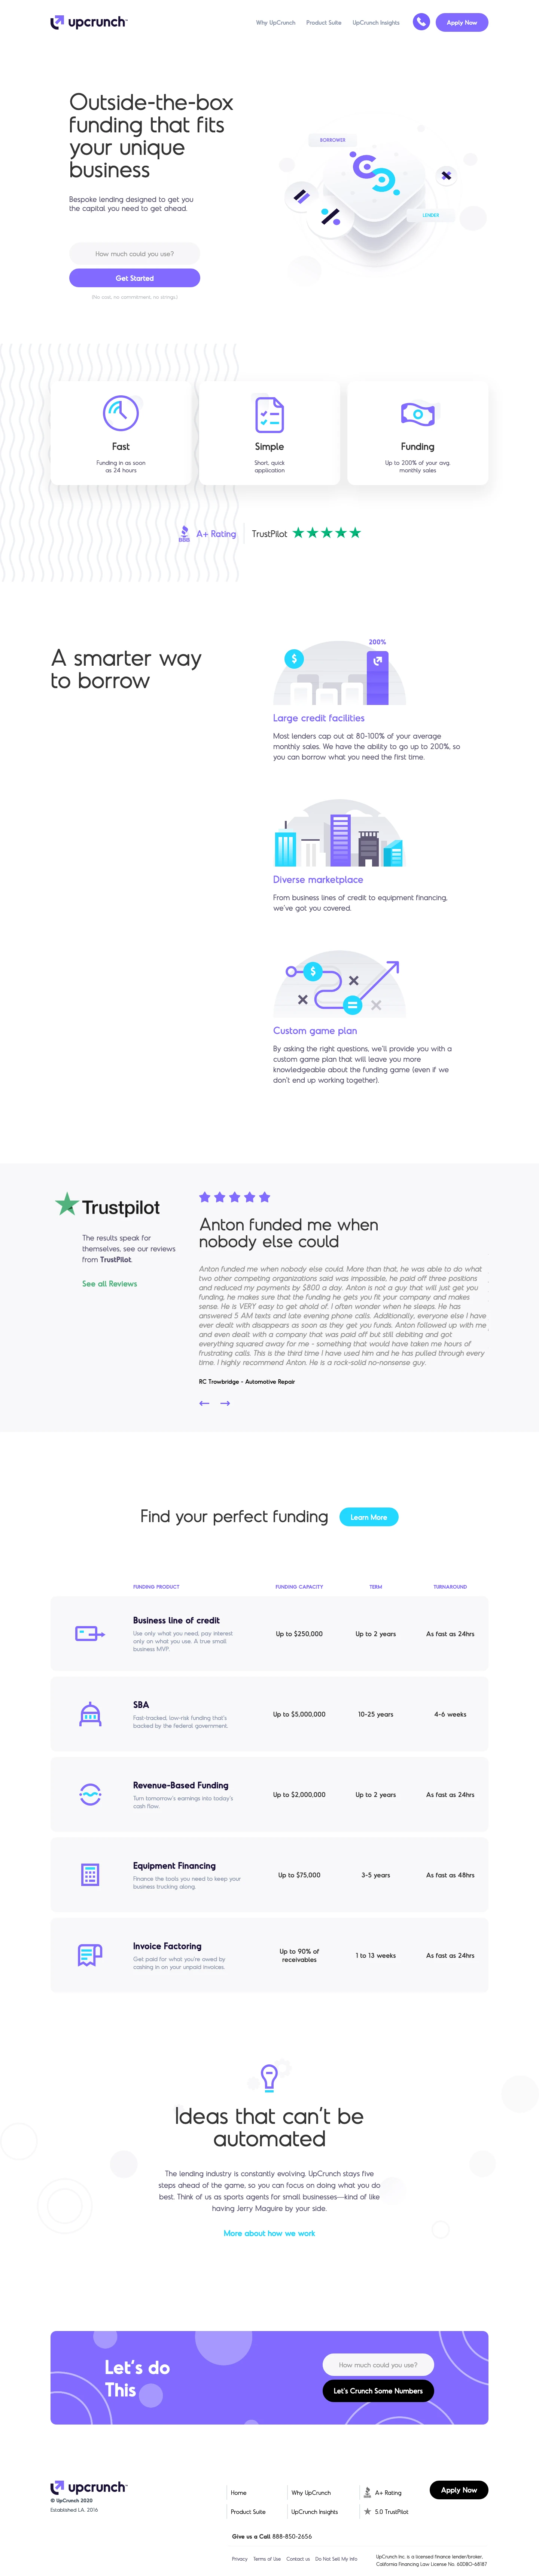 UpCrunch Landing Page Example: UpCrunch makes funding your small business quick and easy. Boost your business with a line of credit, equipment financing or working capital in as fast as 24 hours.